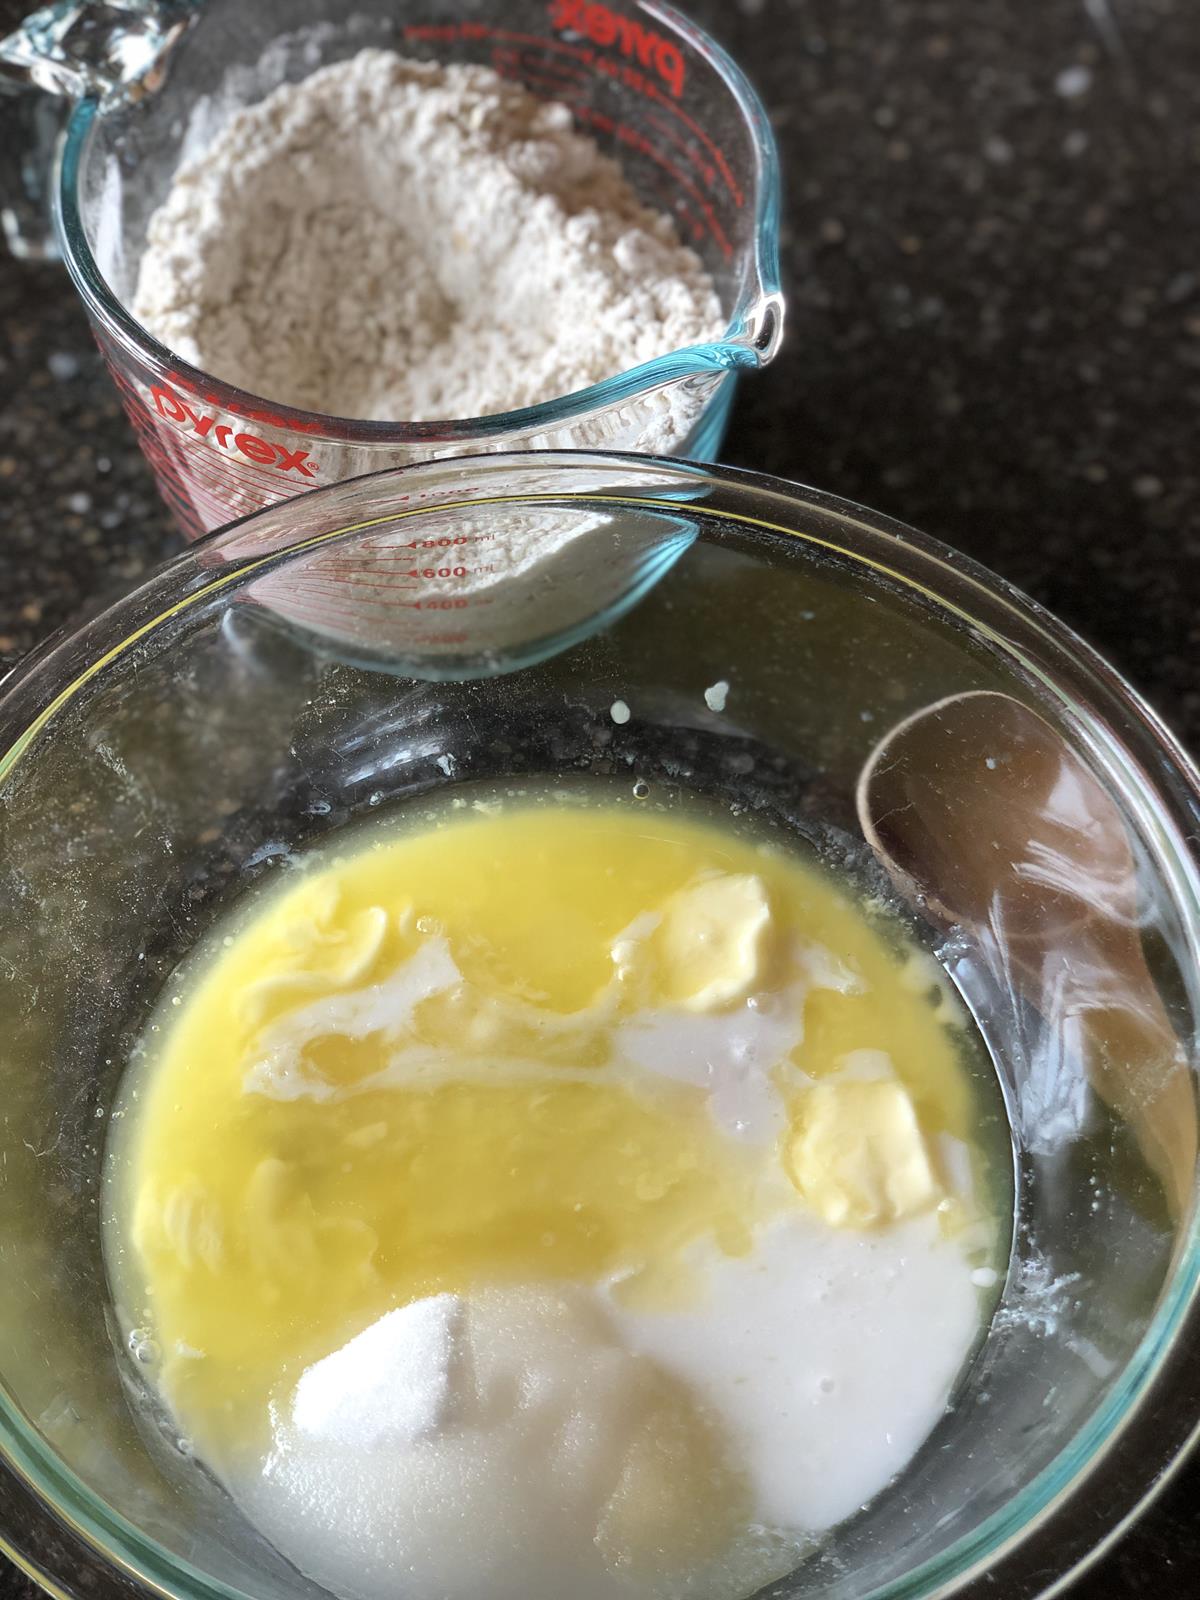 muffin batter in glass bowl with measuring cup in background